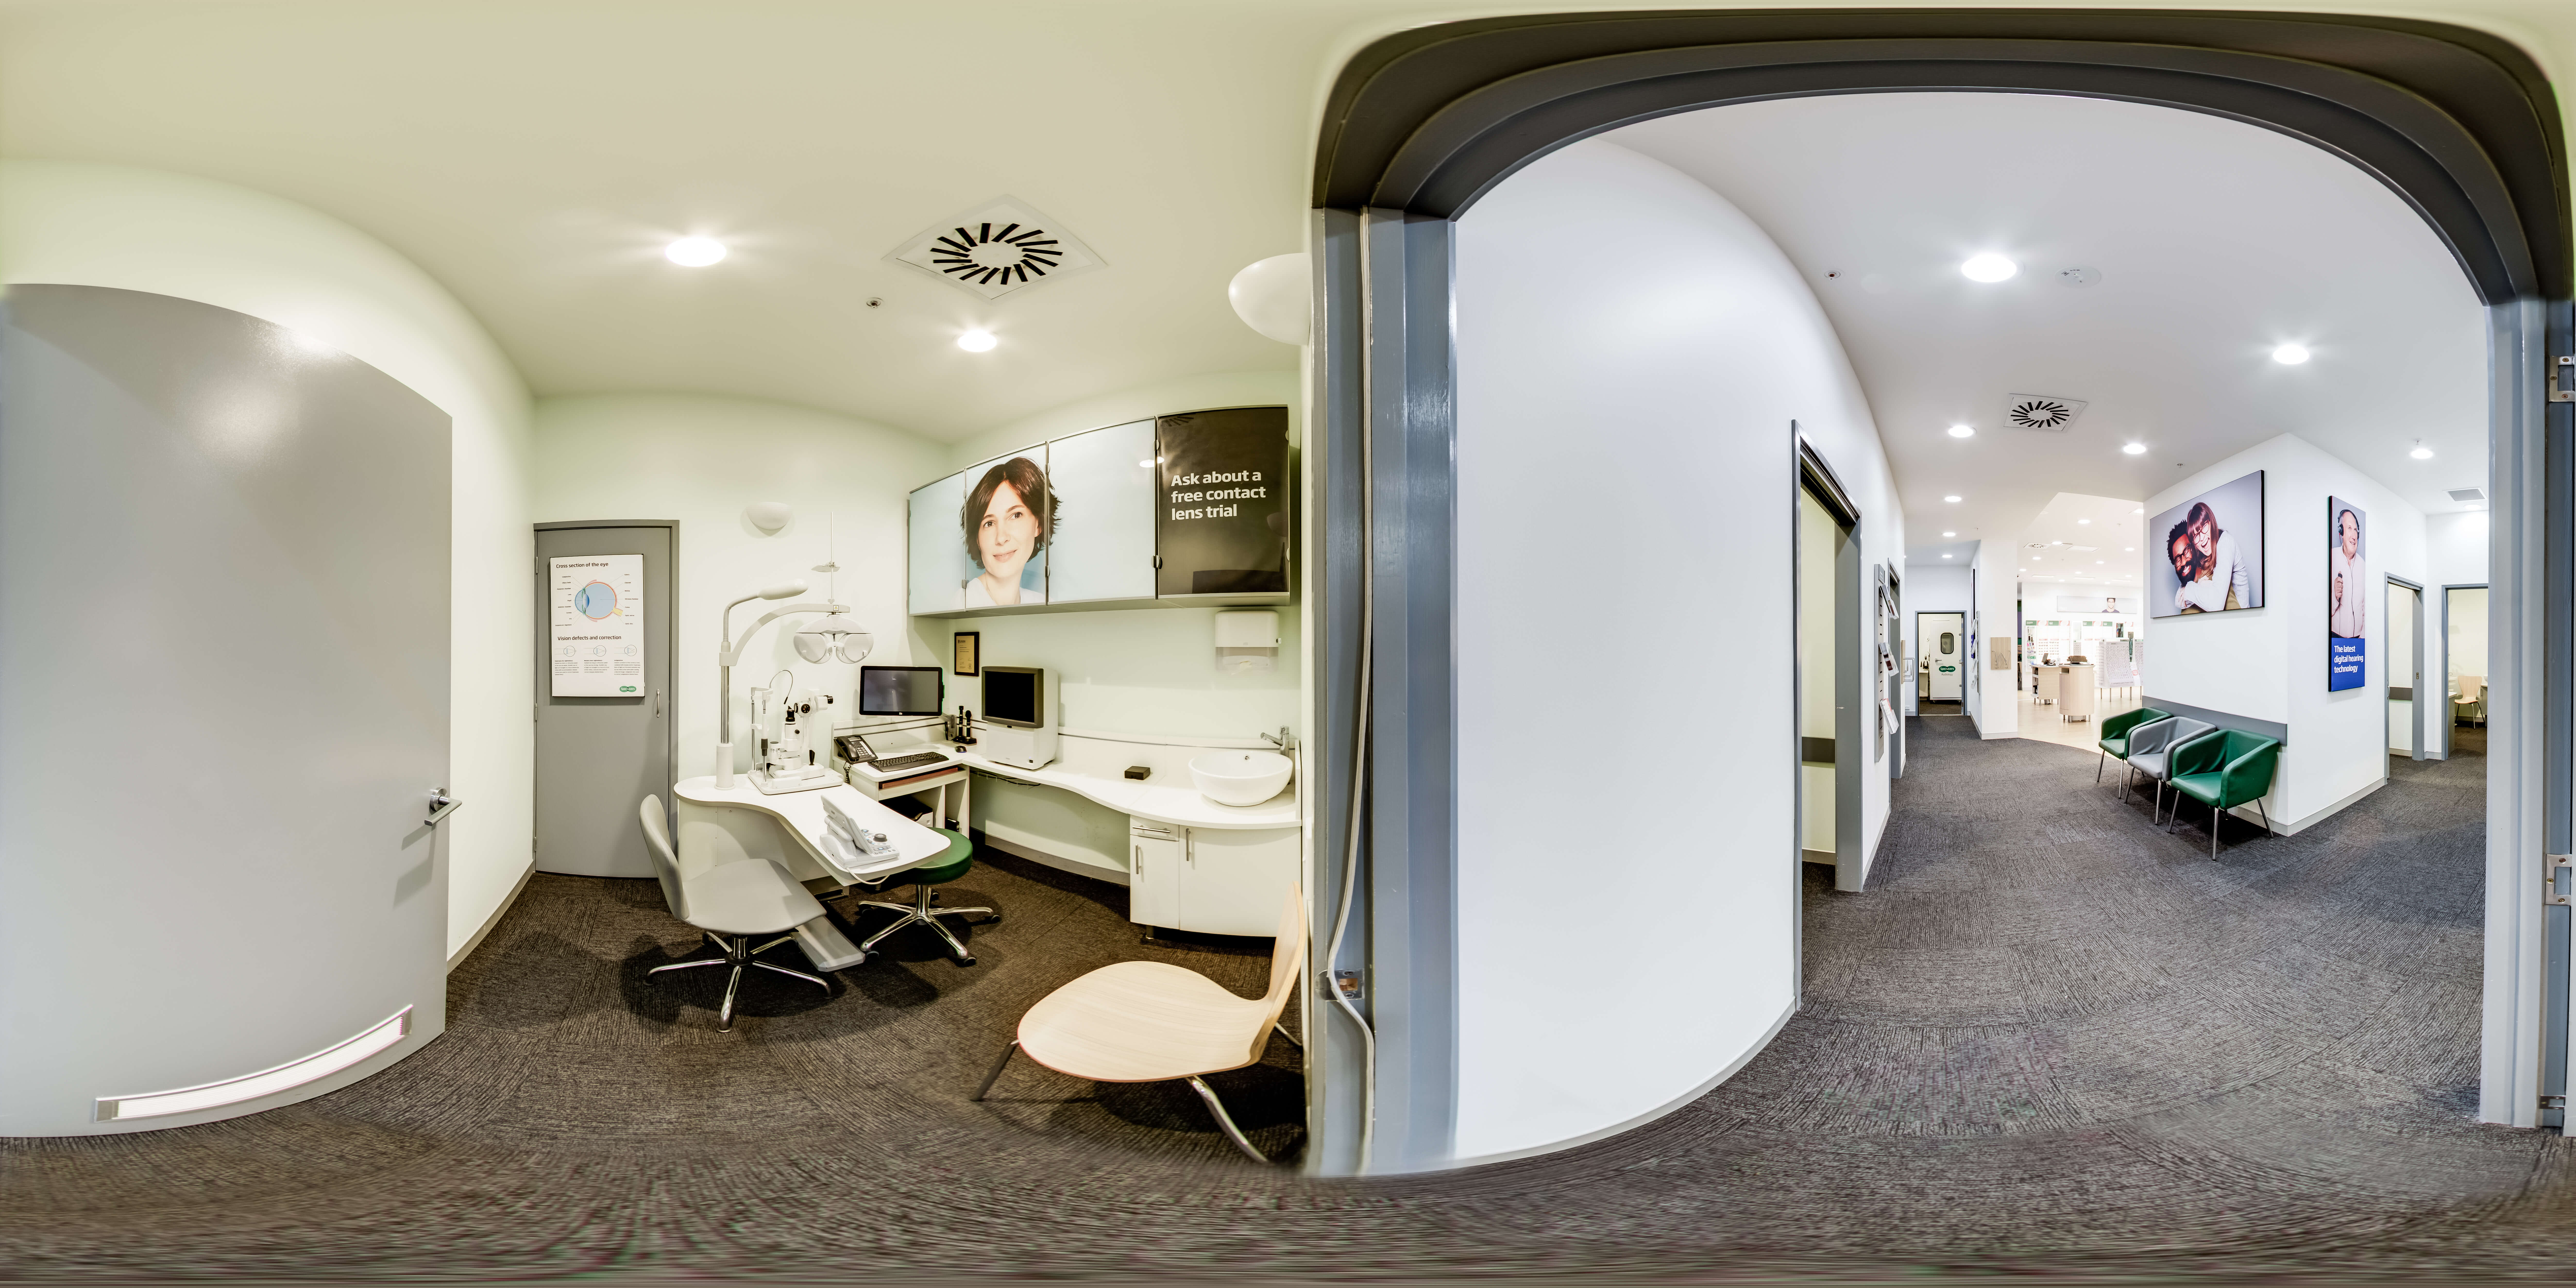 Images Specsavers Optometrists & Audiology - Campbelltown